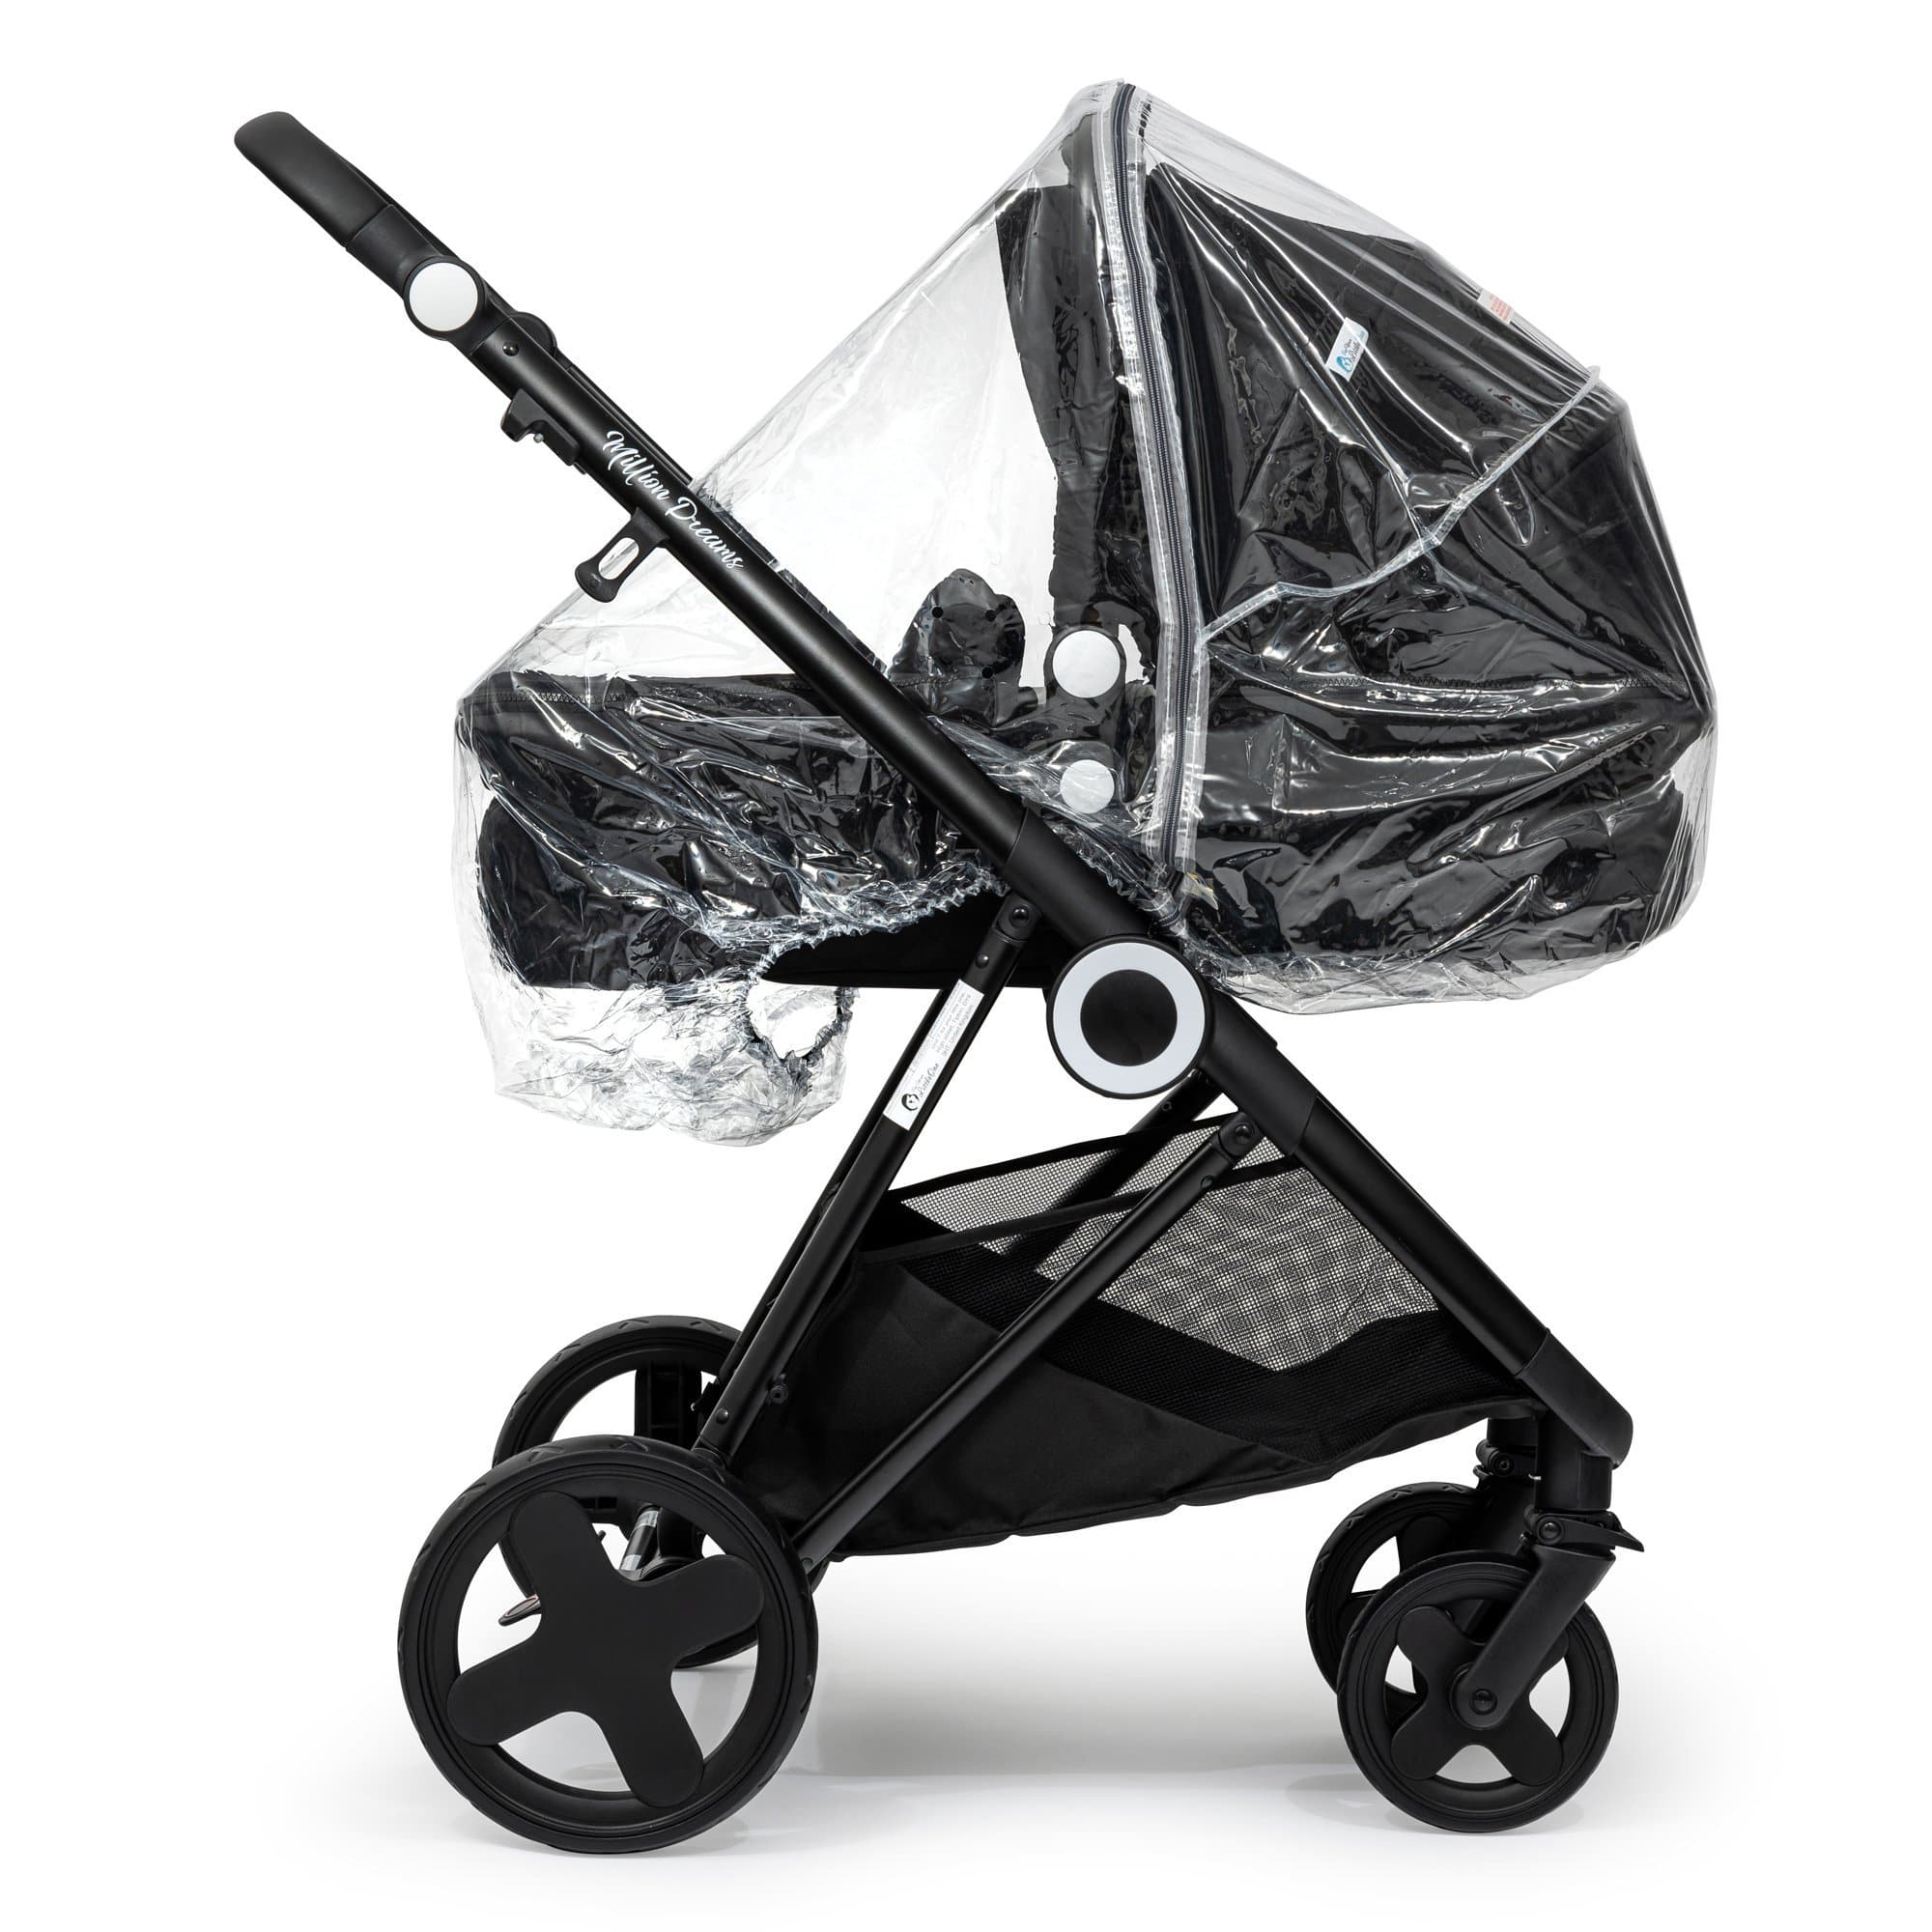 2 in 1 Rain Cover Compatible with My Child - Fits All Models - For Your Little One